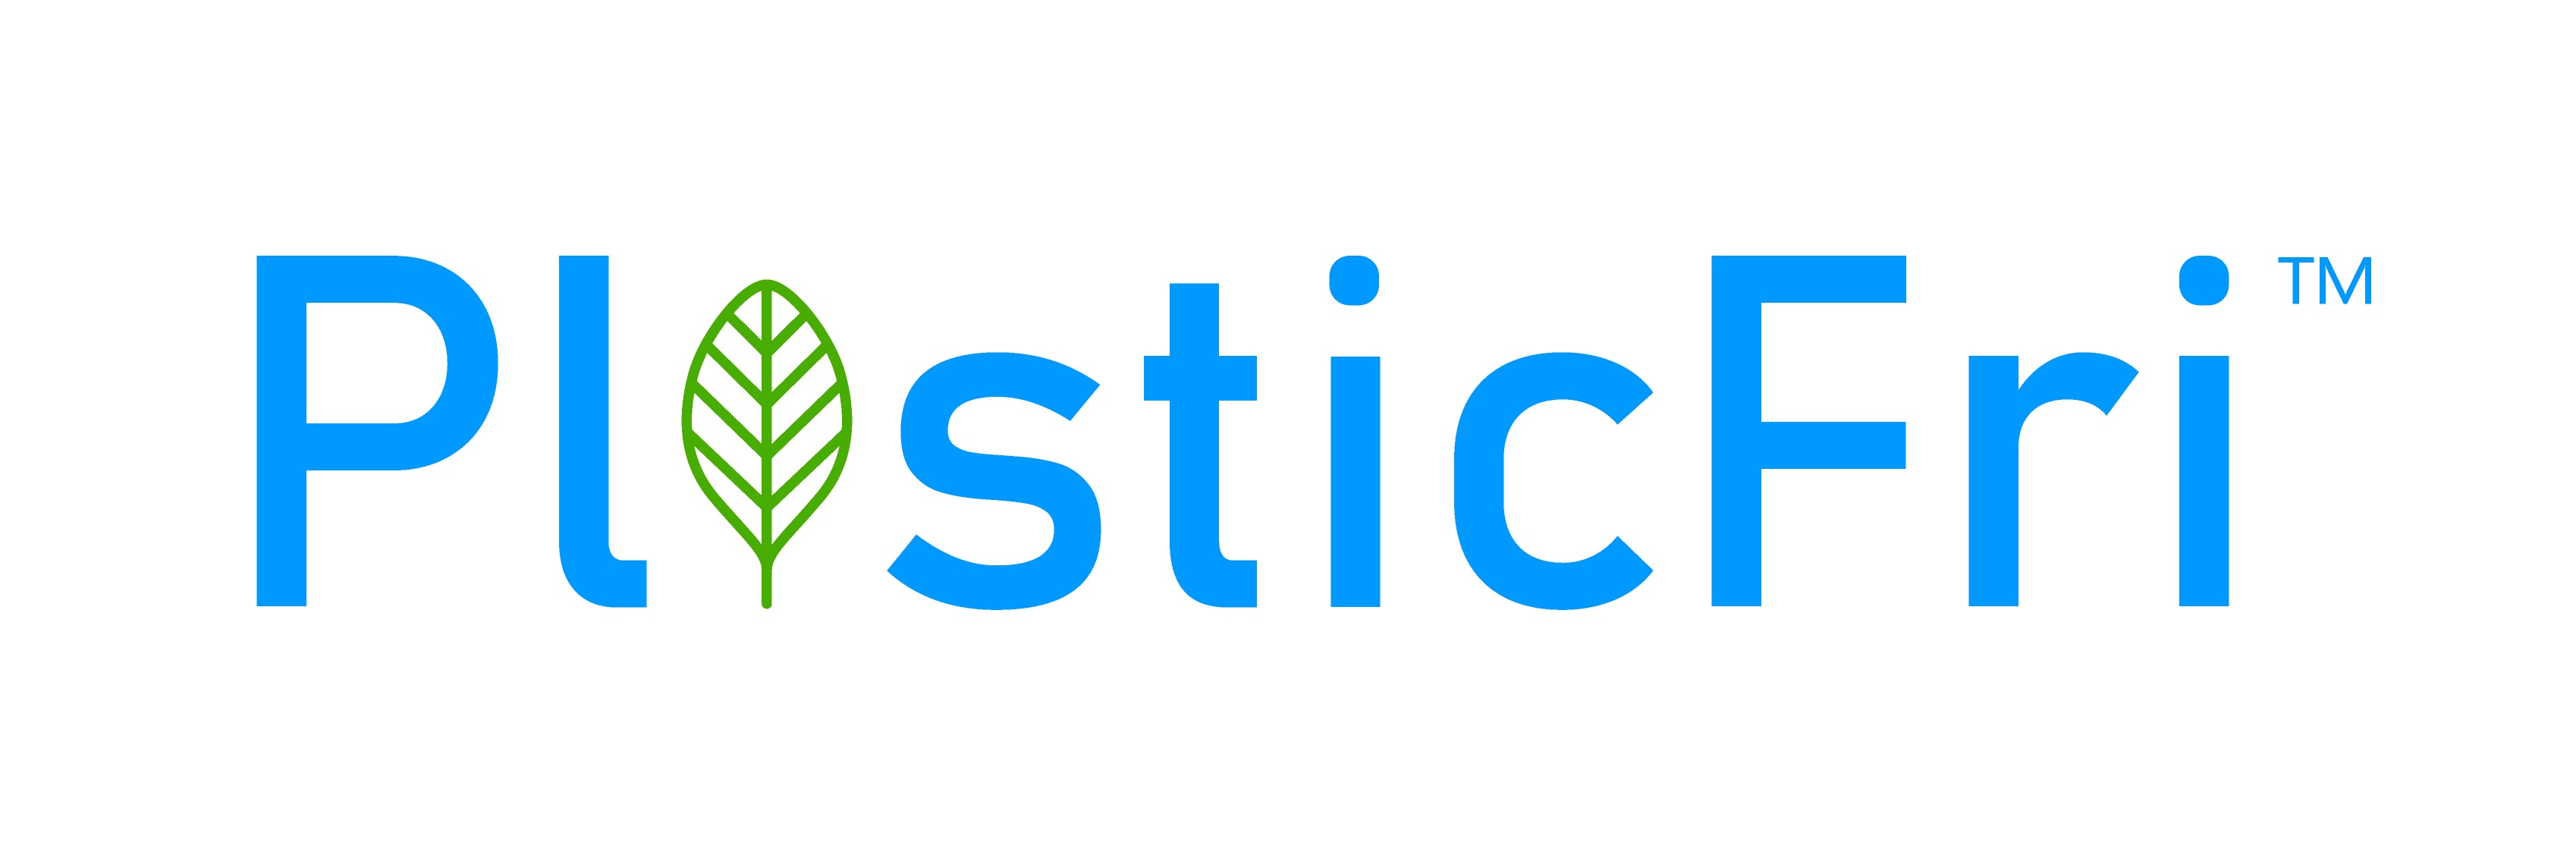 A blue text logo on white background with a leaf in place of the 'a'